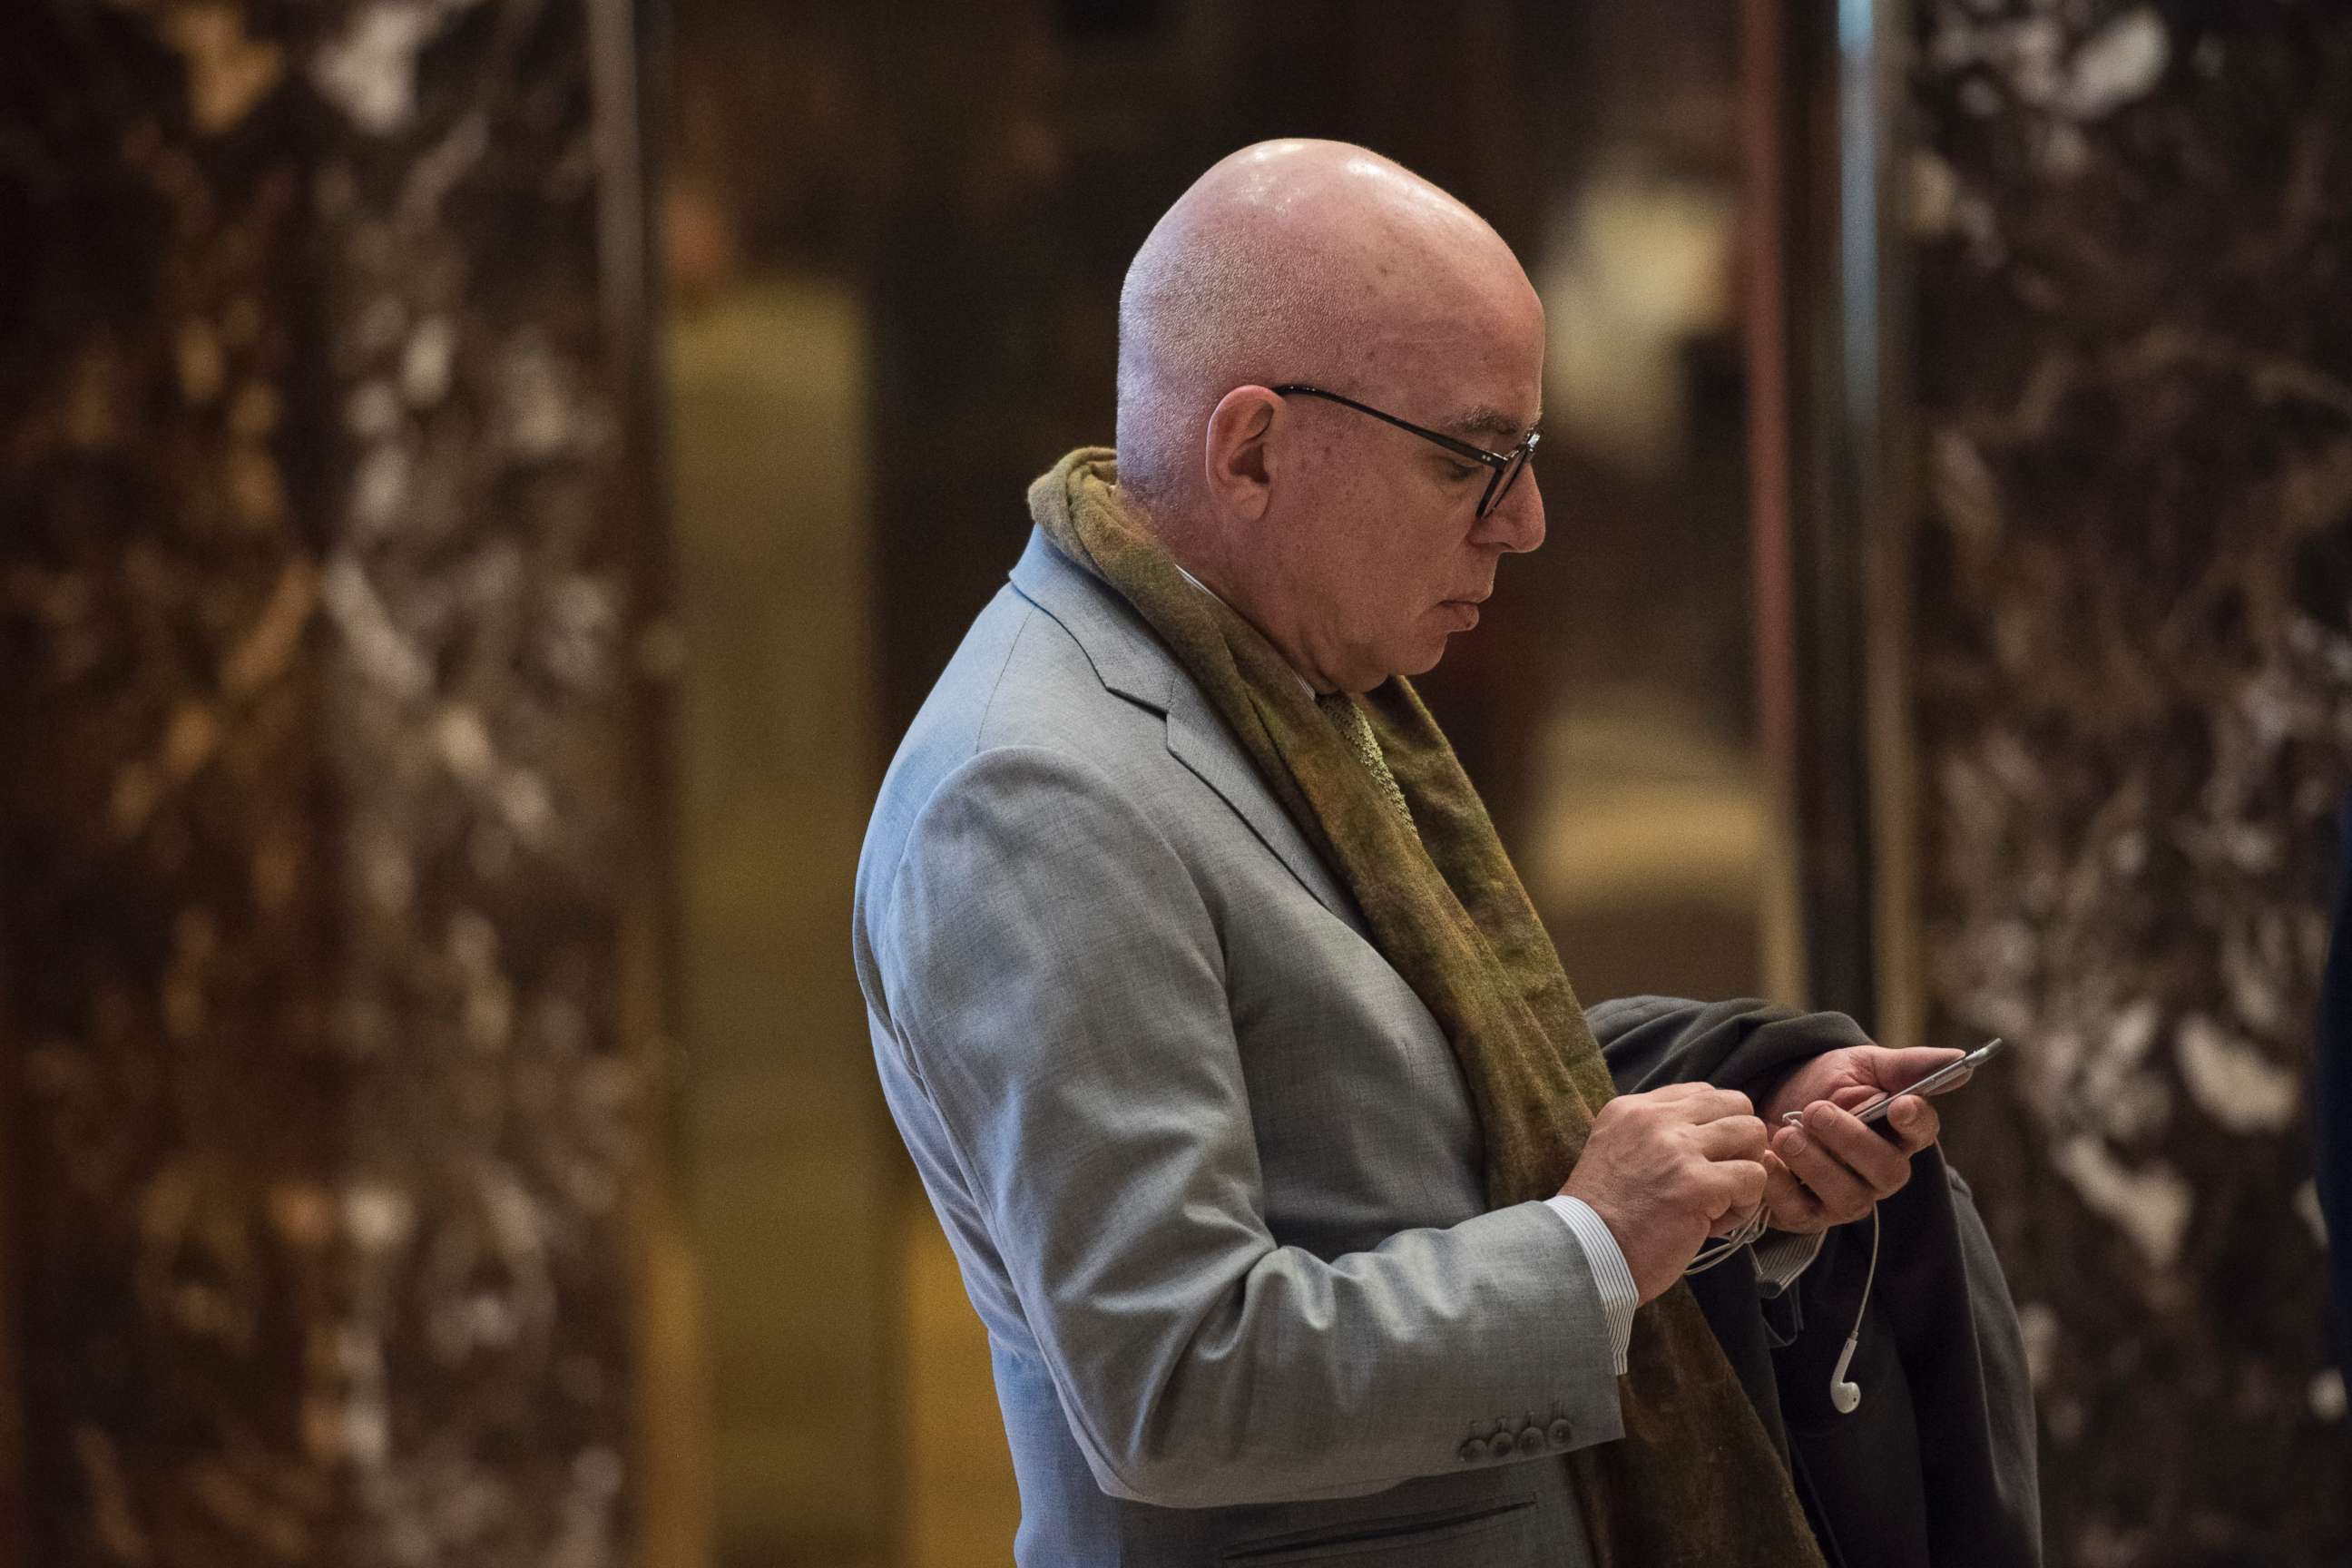 PHOTO: Michael Wolff stands in the lobby at Trump Tower in New York, Jan. 12, 2017.